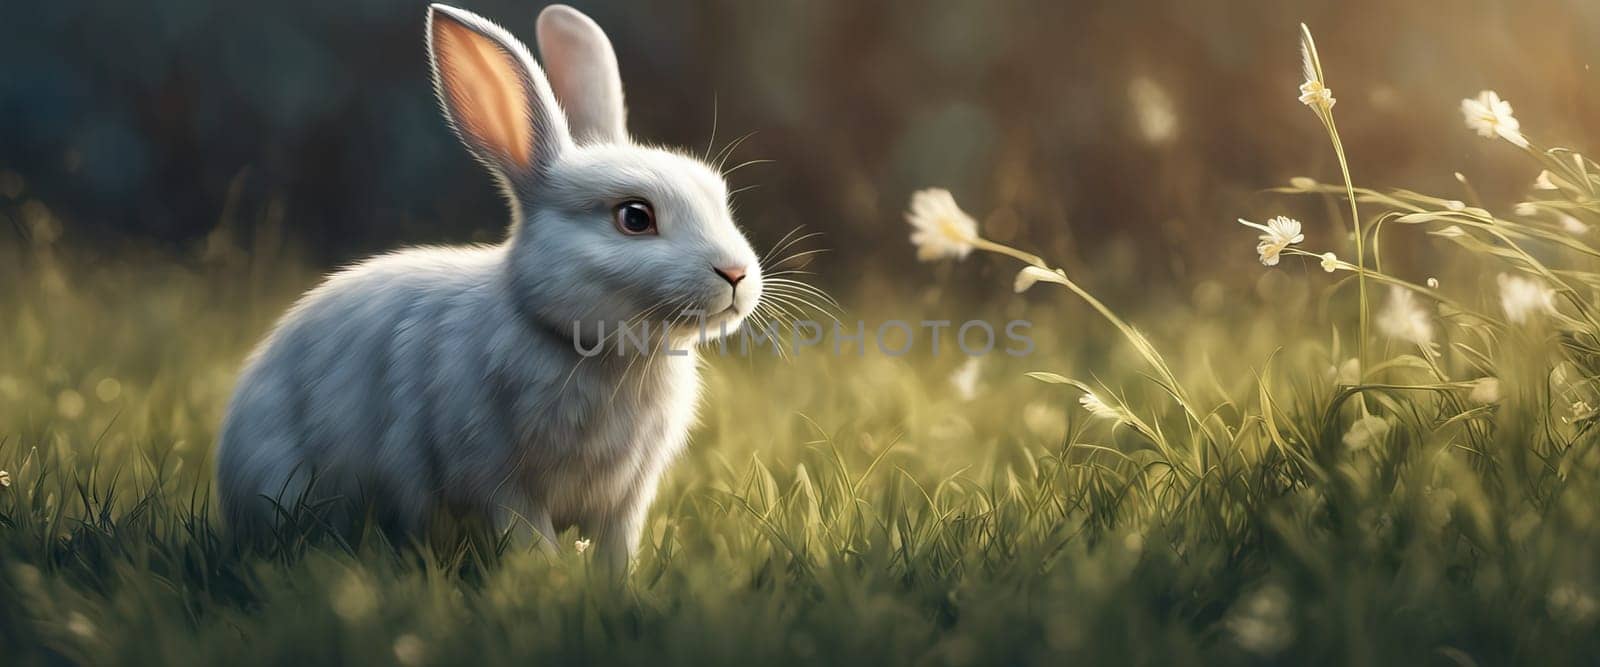 Cute little rabbit sitting in grass in the sunshine, banner for your design